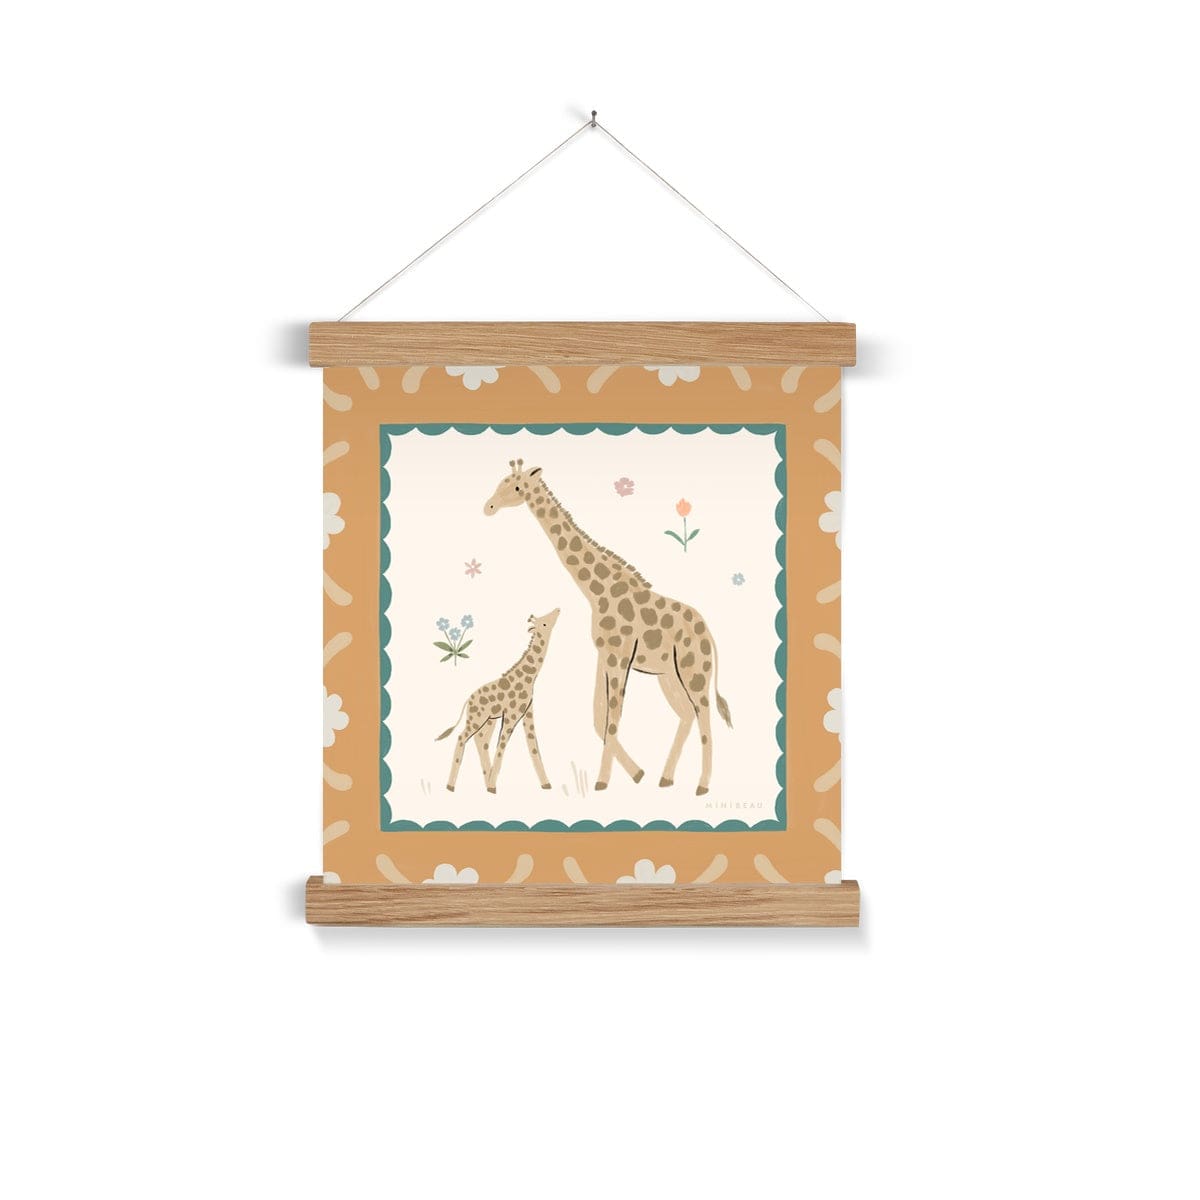 Our pretty Serengeti Giraffe art print is square and features and adult and baby giraffe. facing each other with the baby looking up and the grown up, on a neutral background with some simple flower. The print is bordered with thing green scallops and a thick yellow border featuring white flowers hanging from a nail in a natural wooden hanger